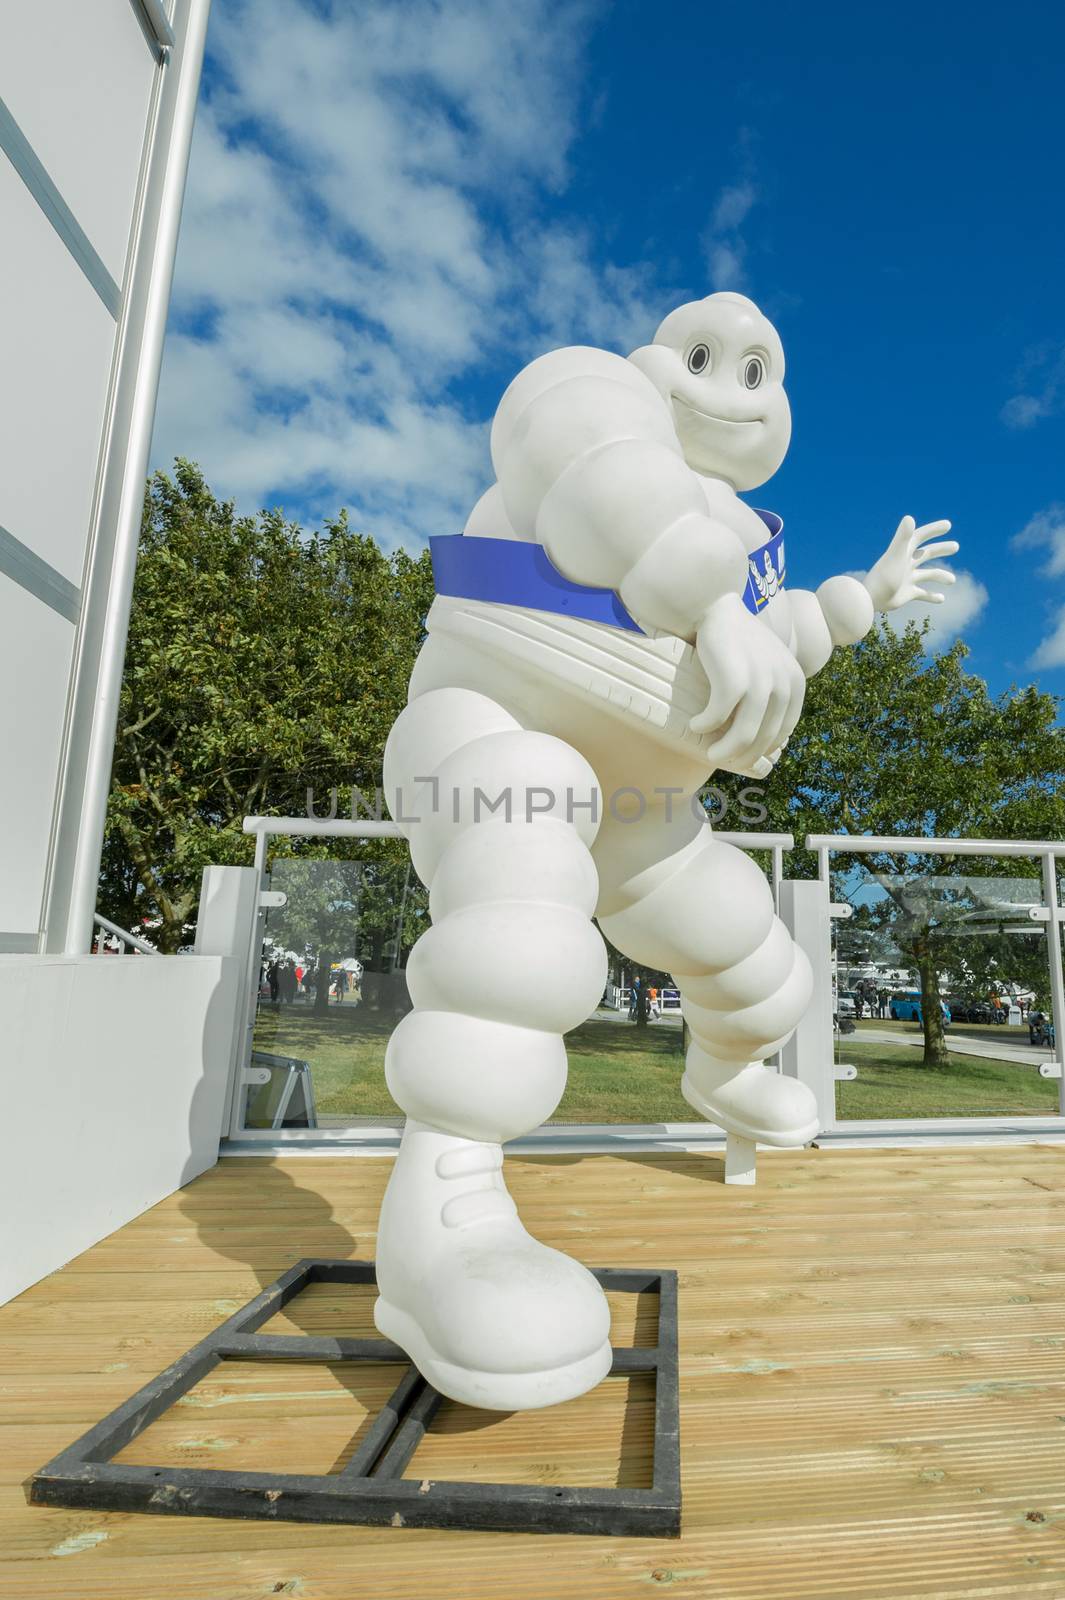 Goodwood, UK - July 1, 2012: Bibendum, more commonly known as the Michelin Man - advertising symbol of the Michelin motor company, on display at Goodwood, UK